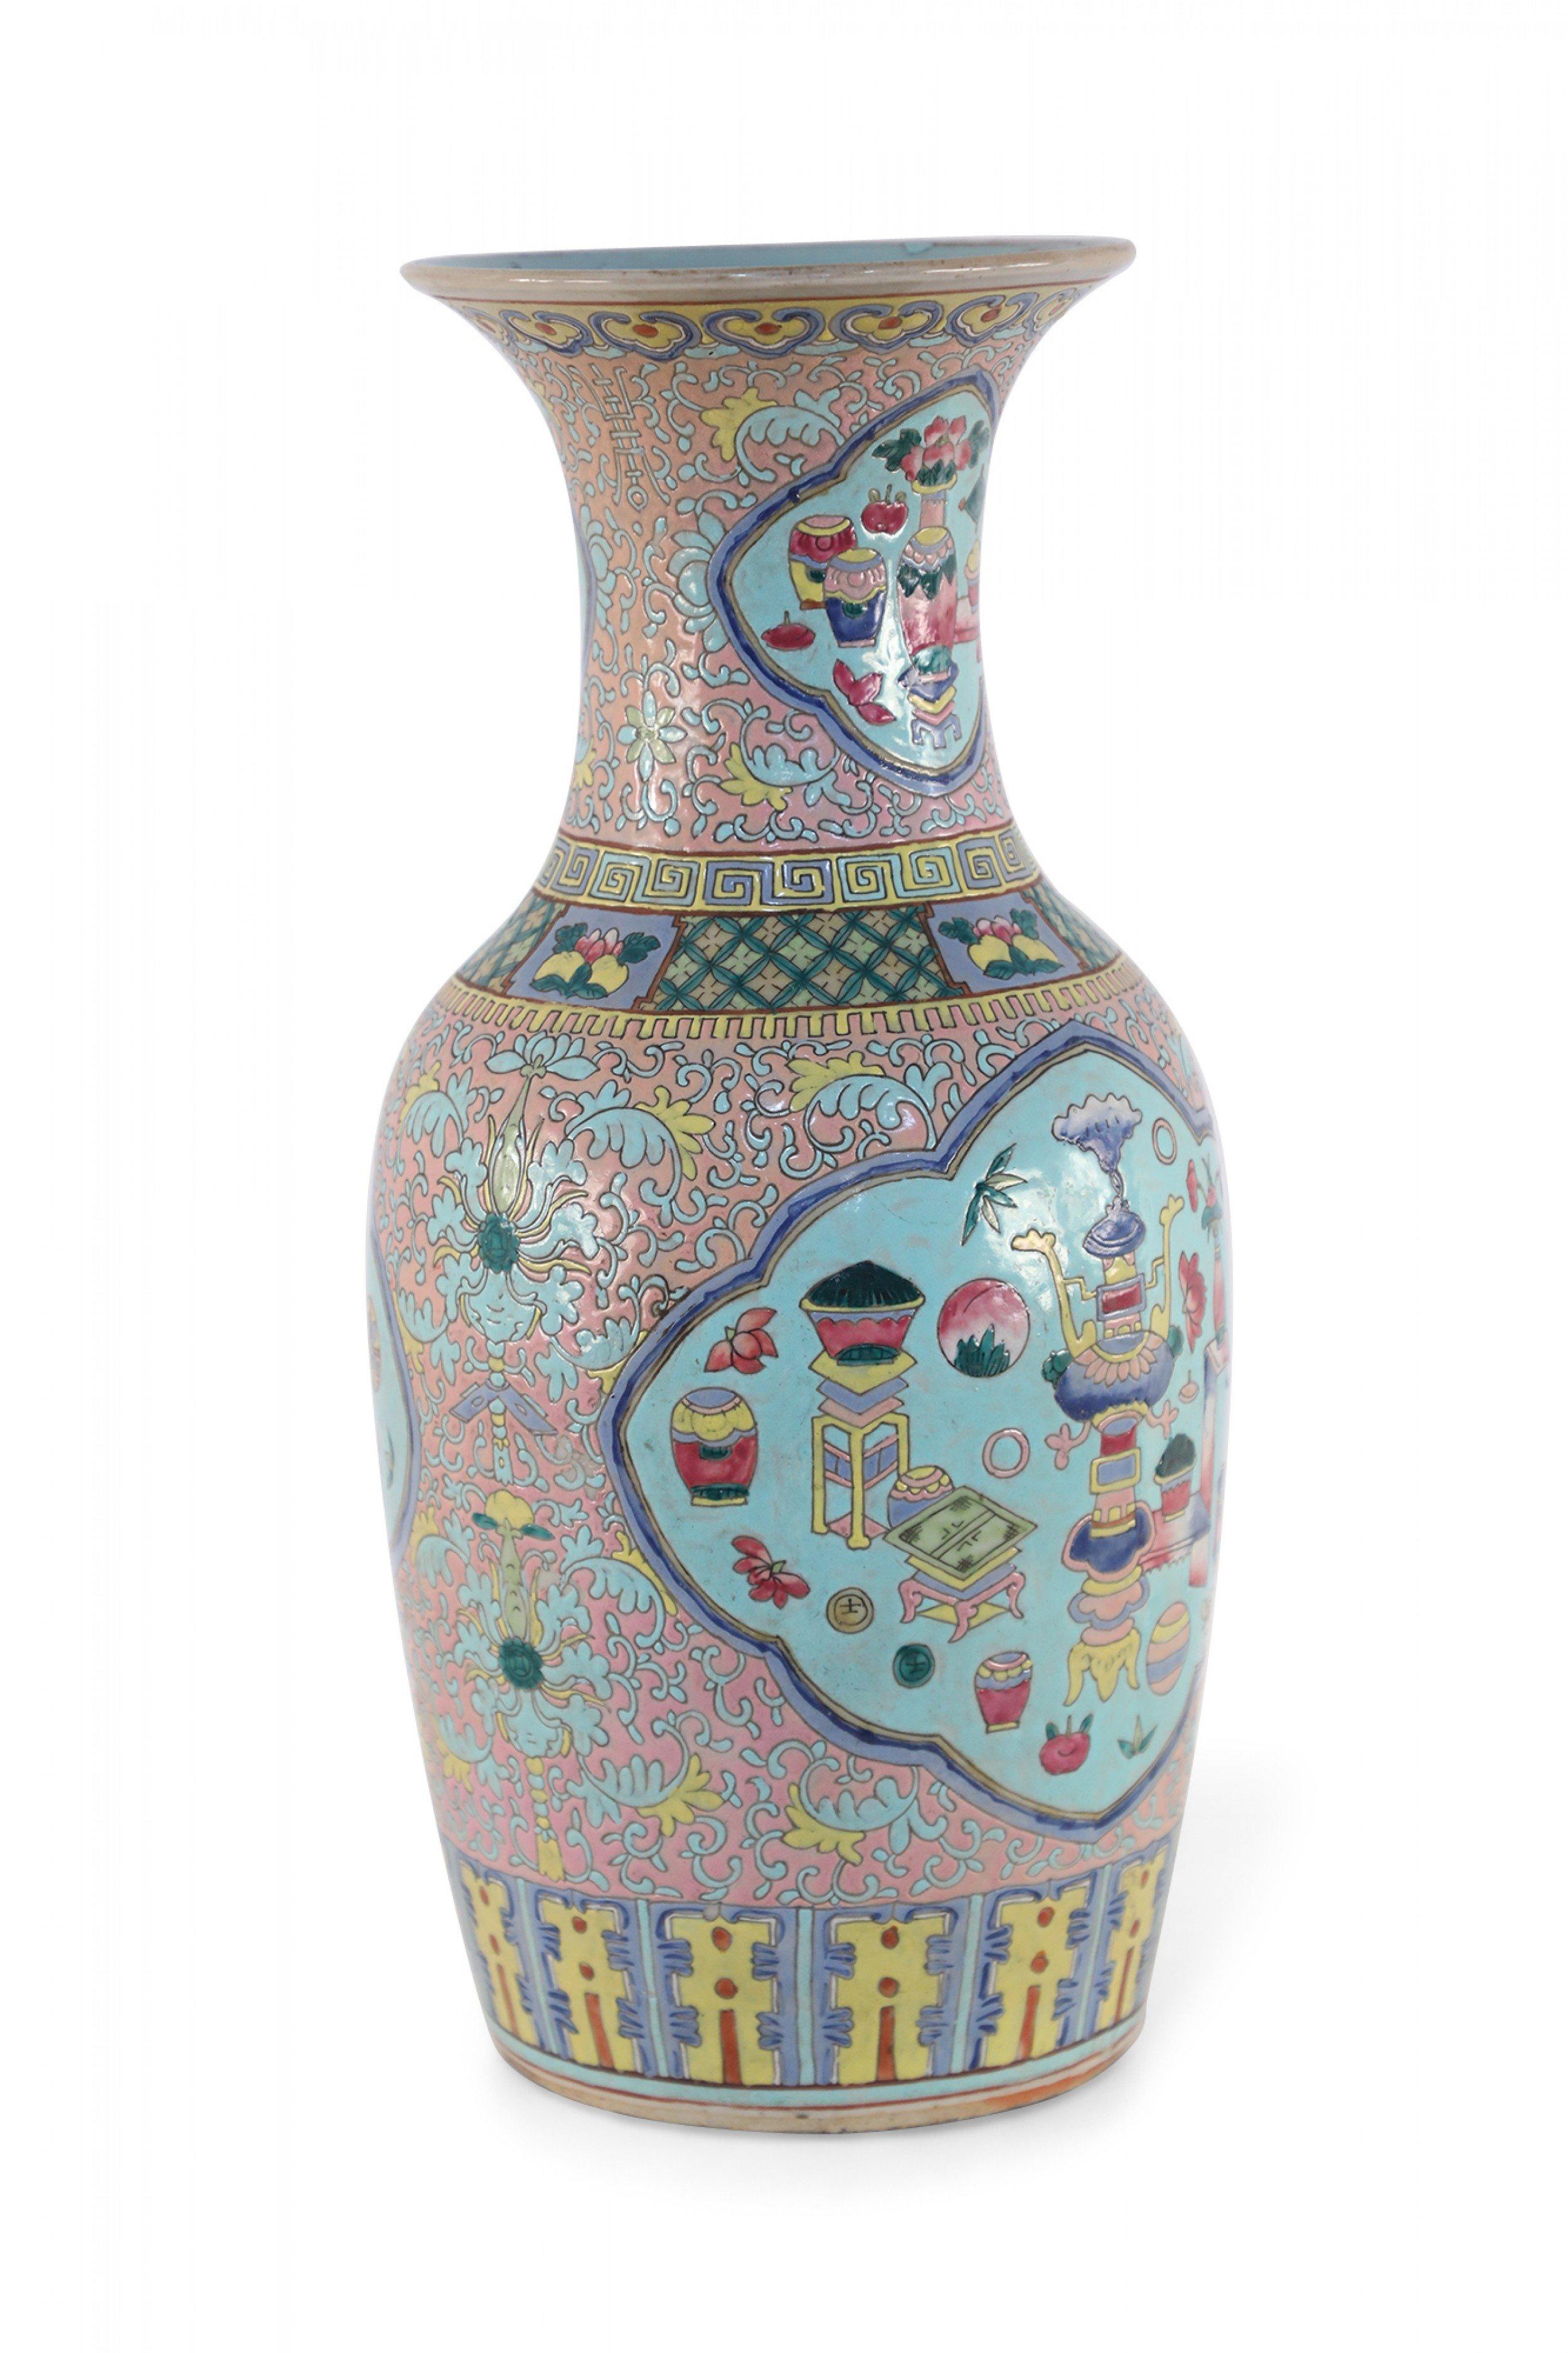 Antique Chinese (late 19th century) pink porcelain urn decorated with a light blue floral design grounding multiple light blue cartouches, each bearing a bogu pattern that signifies elegance and fun.
     